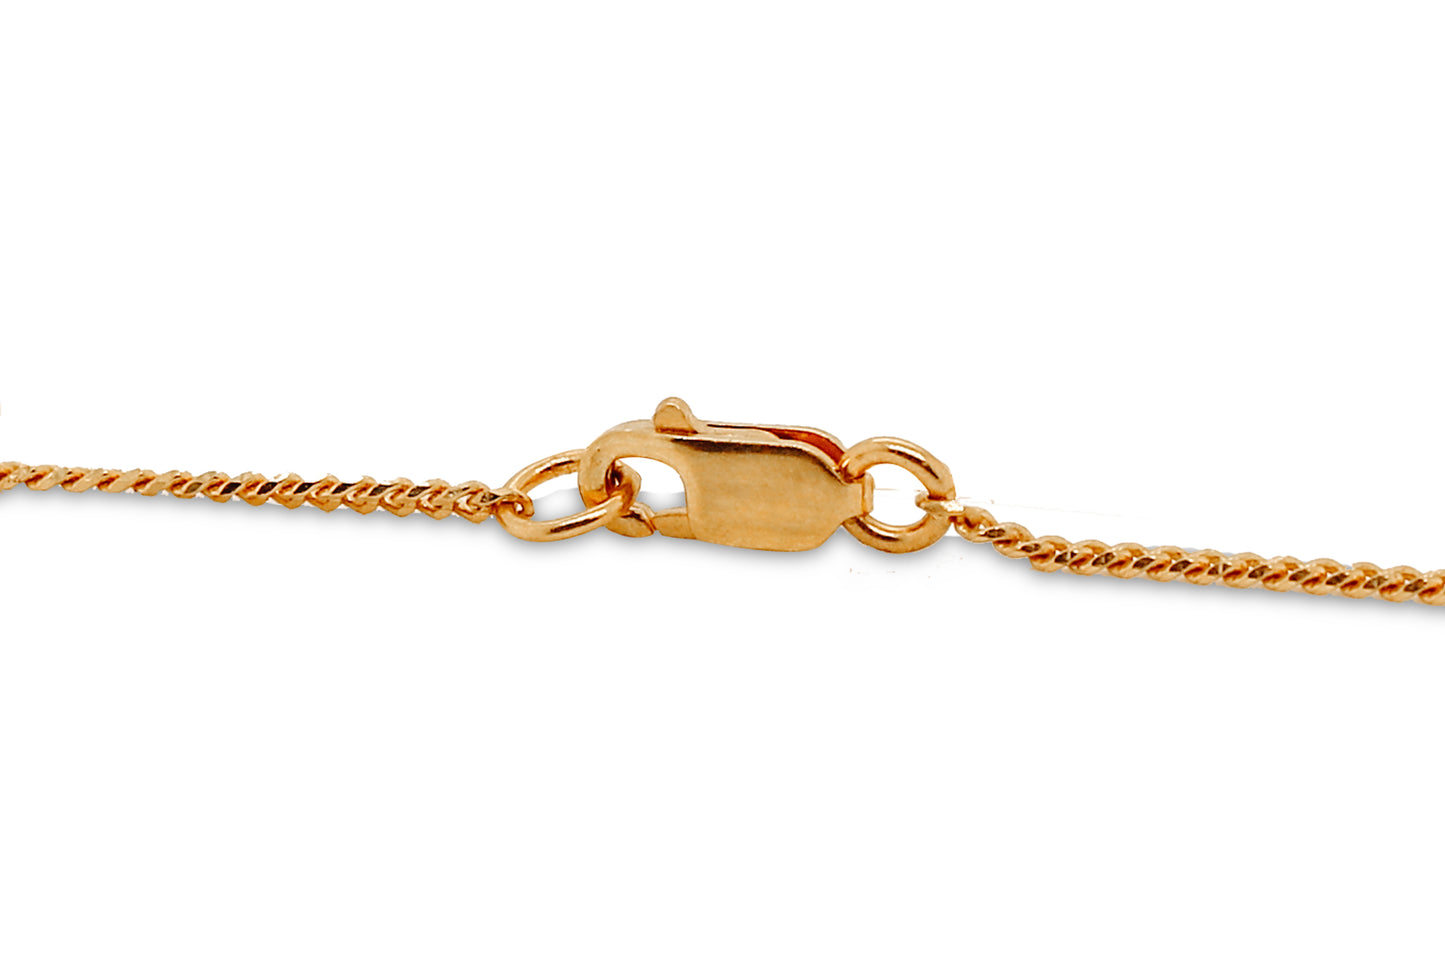 22Kt Gold Flat Curb Chain Necklace